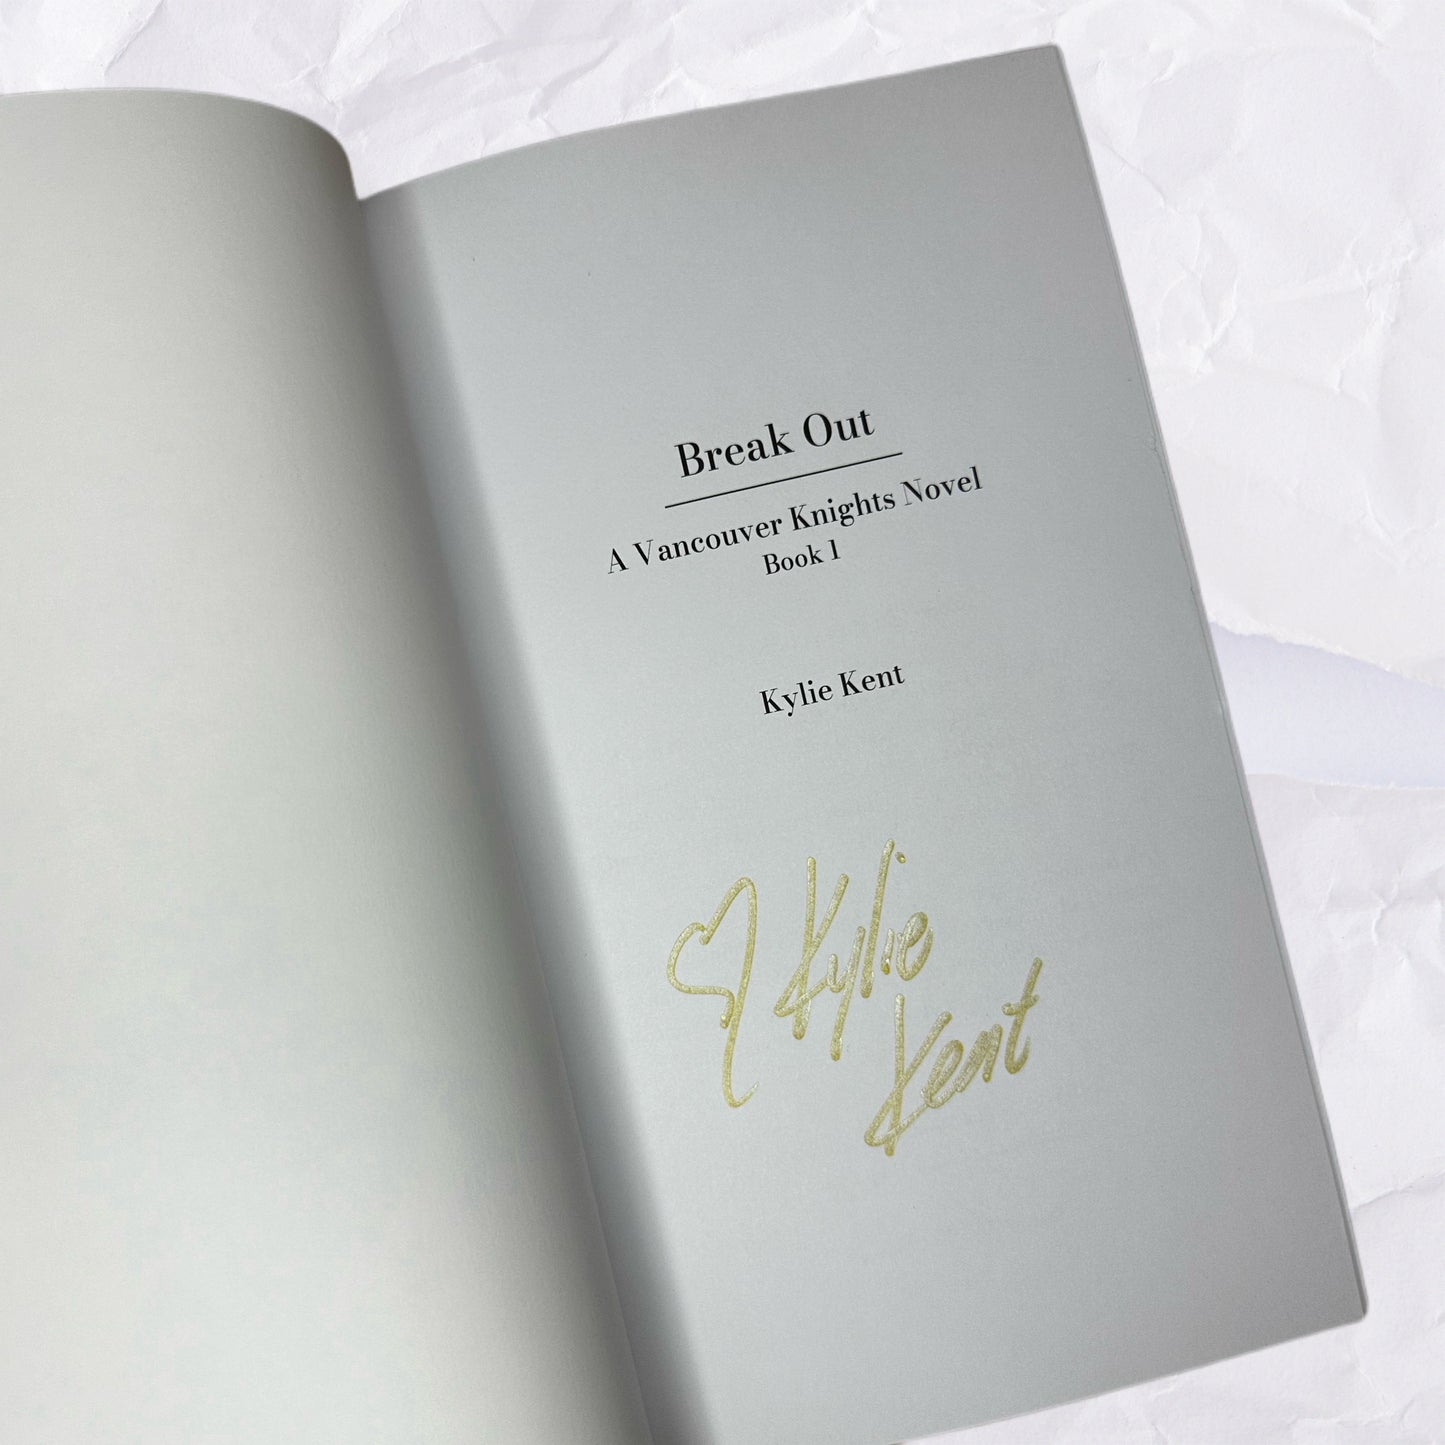 Break Out (Vancouver Knights #1) by Kylie Kent - Foiled Edition